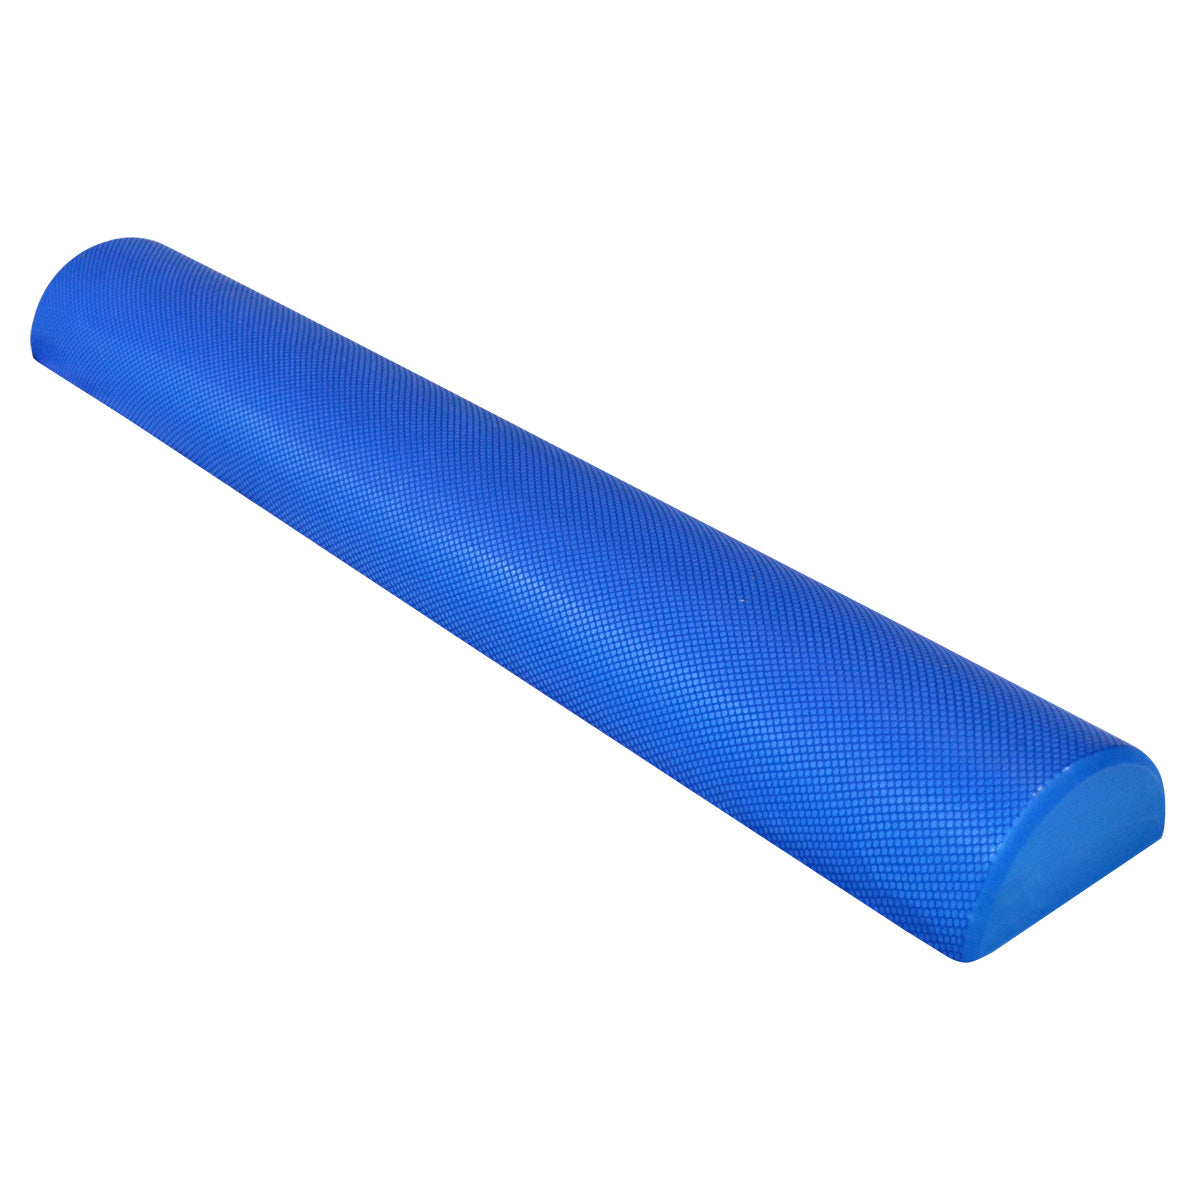 36'' Half Round EVA Foam Muscle Roller - Buy One Get One Free – Yoga  Accessories